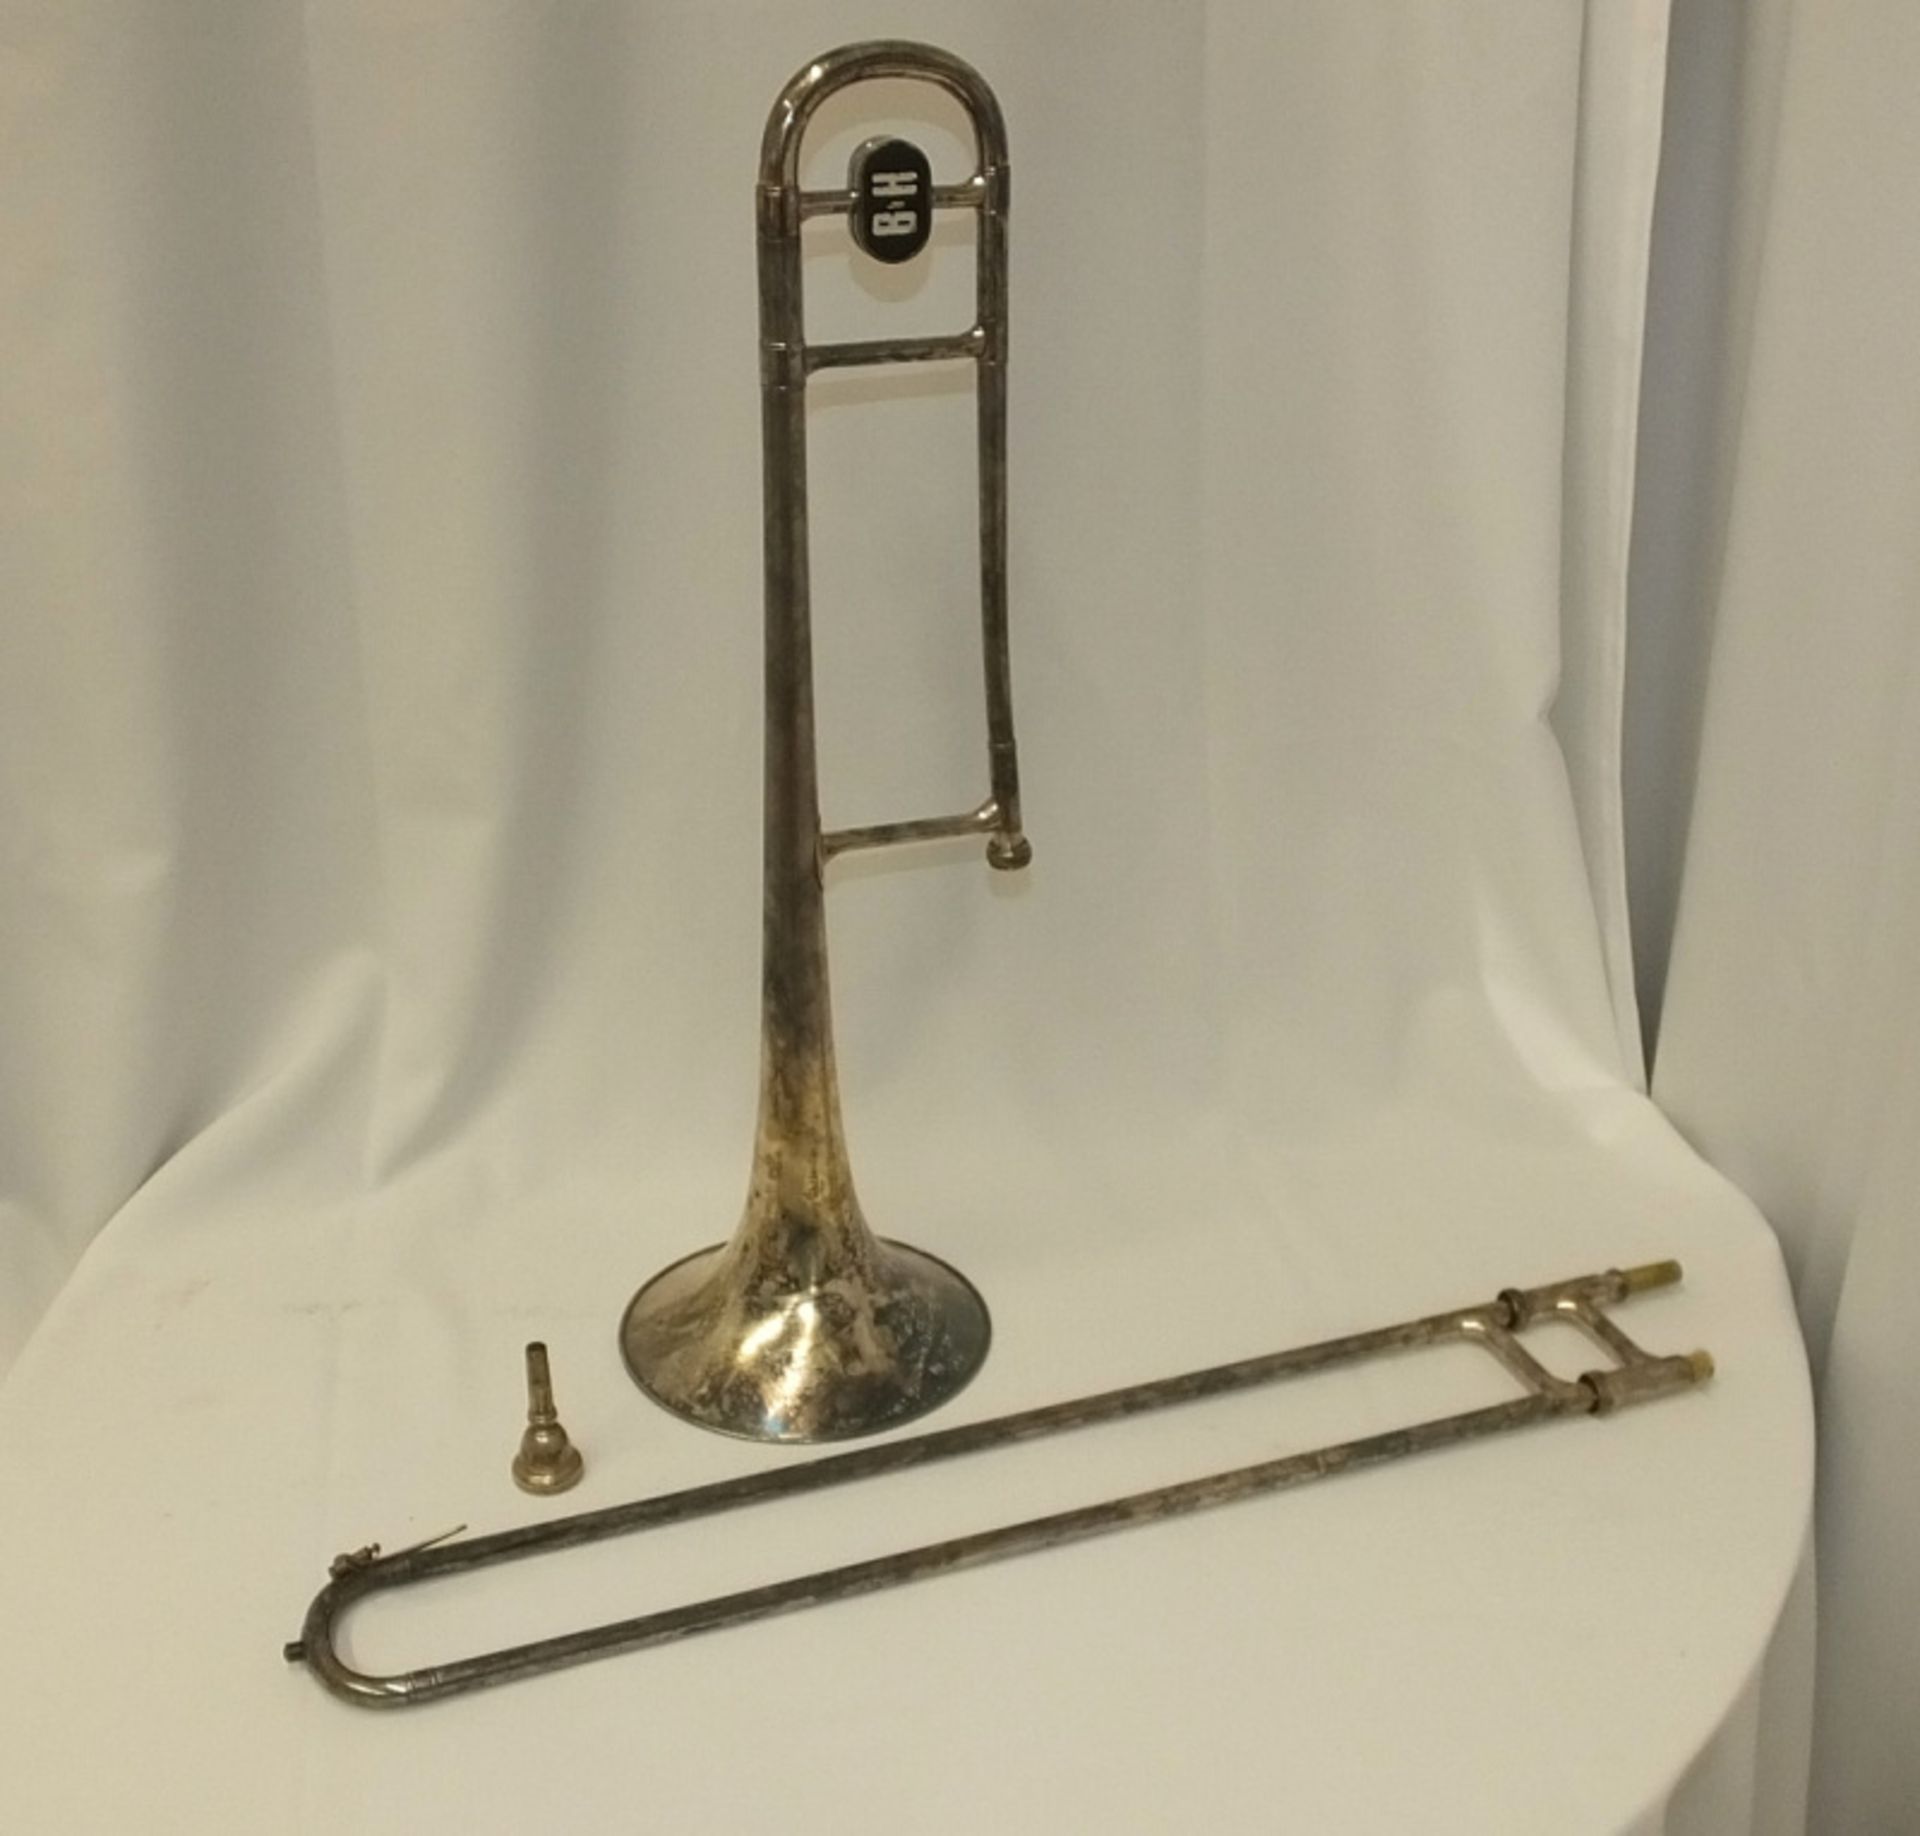 Boosey & Hawkes 636 Trombone in case - serial number 621249 - Please check photos carefully - Image 2 of 10